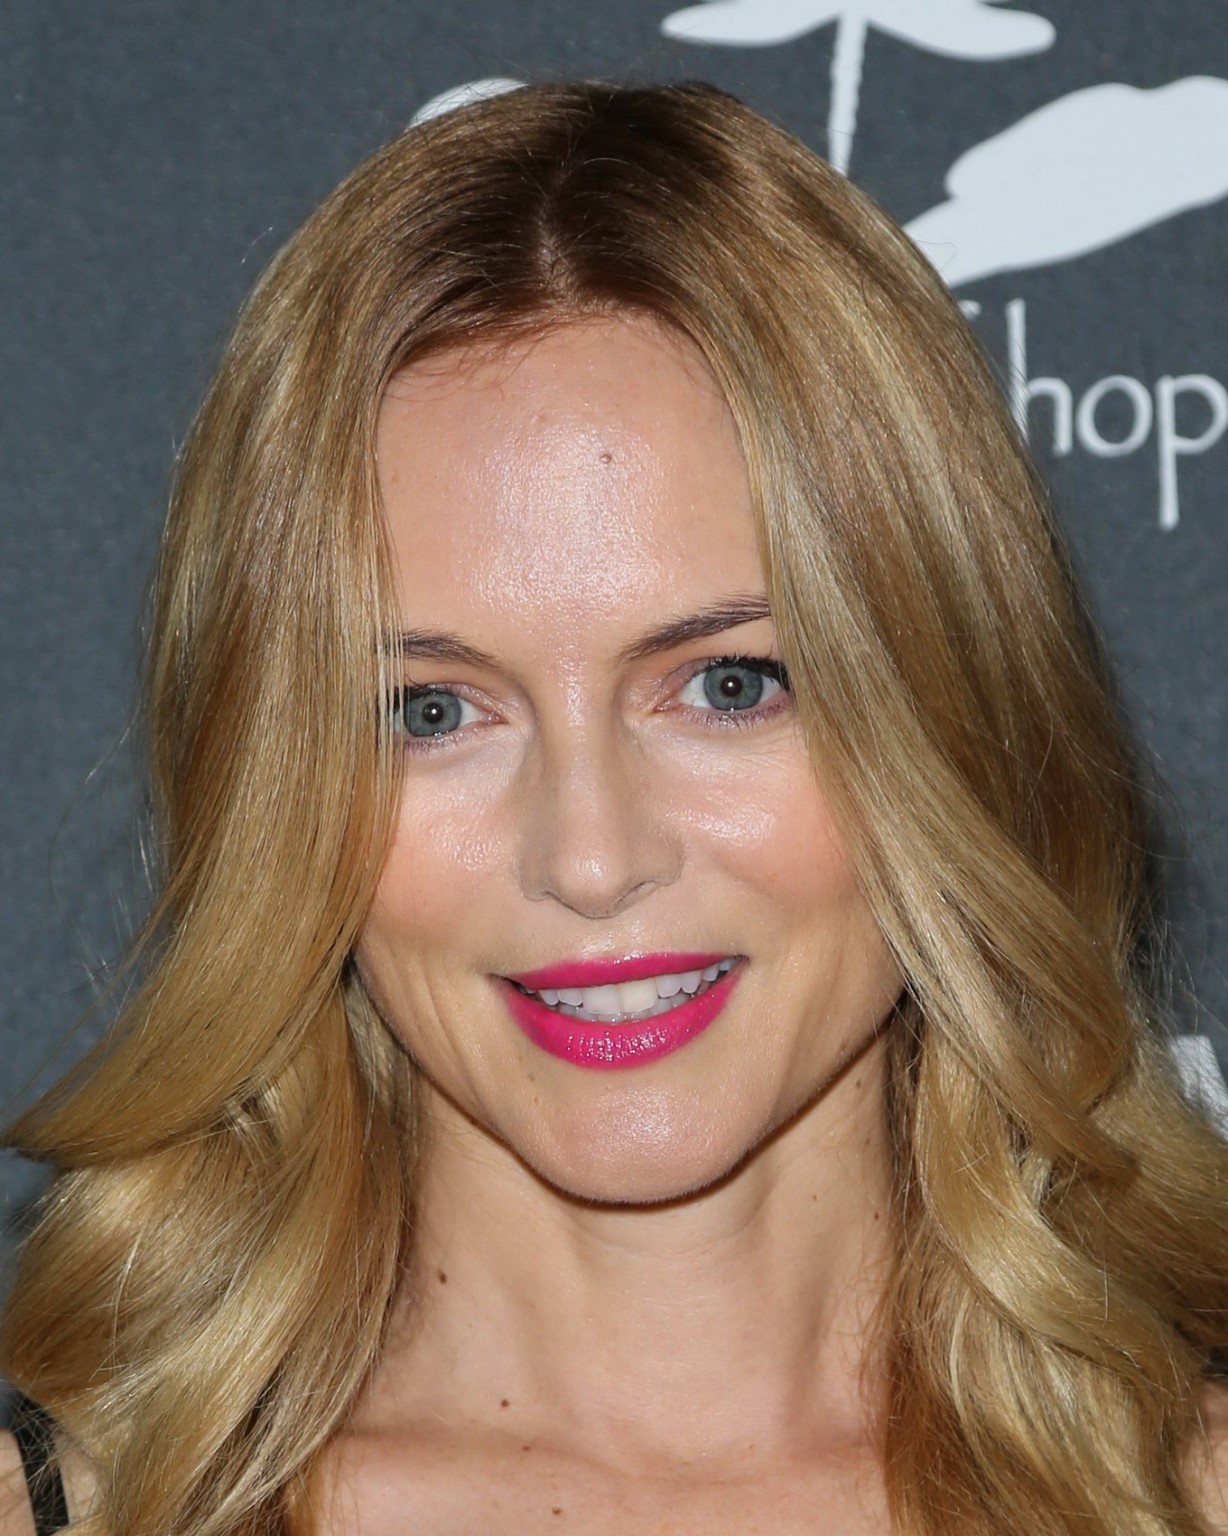 Heather Graham Wearing Skimpy Black Leather Mini Dress At The Echoes Of Hope's 3